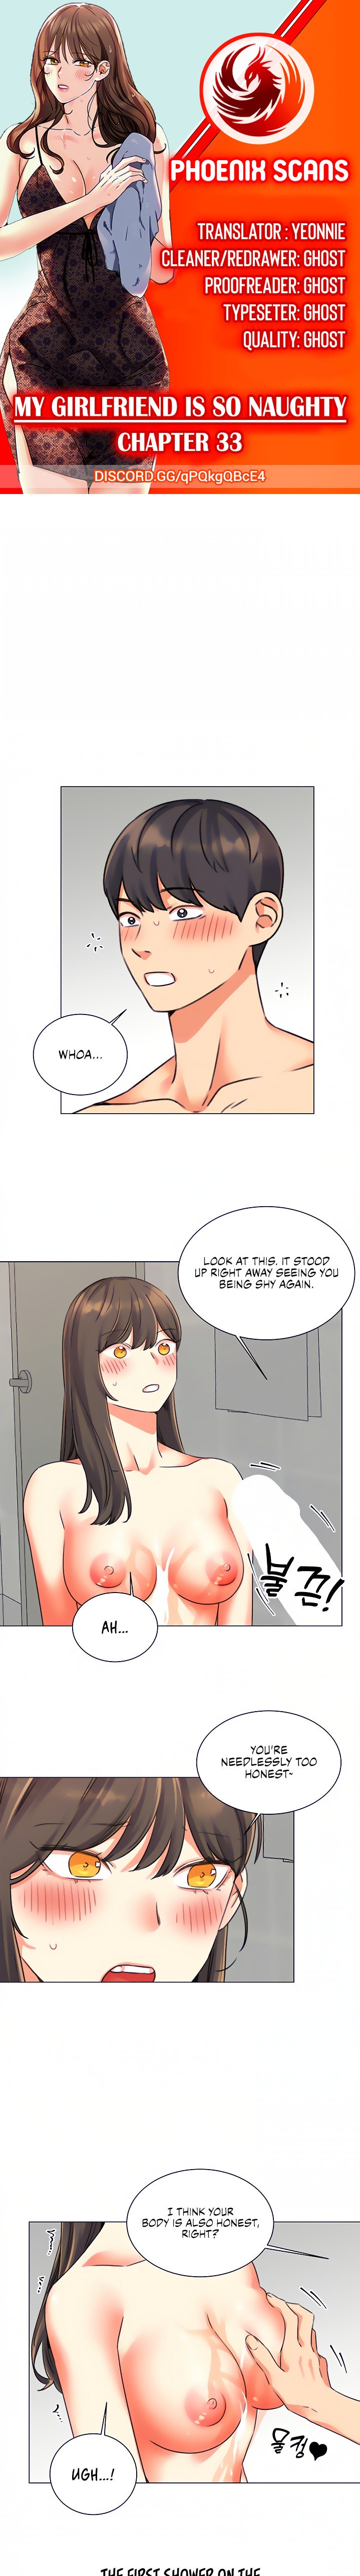 My girlfriend is so naughty - Chapter 33 Page 1